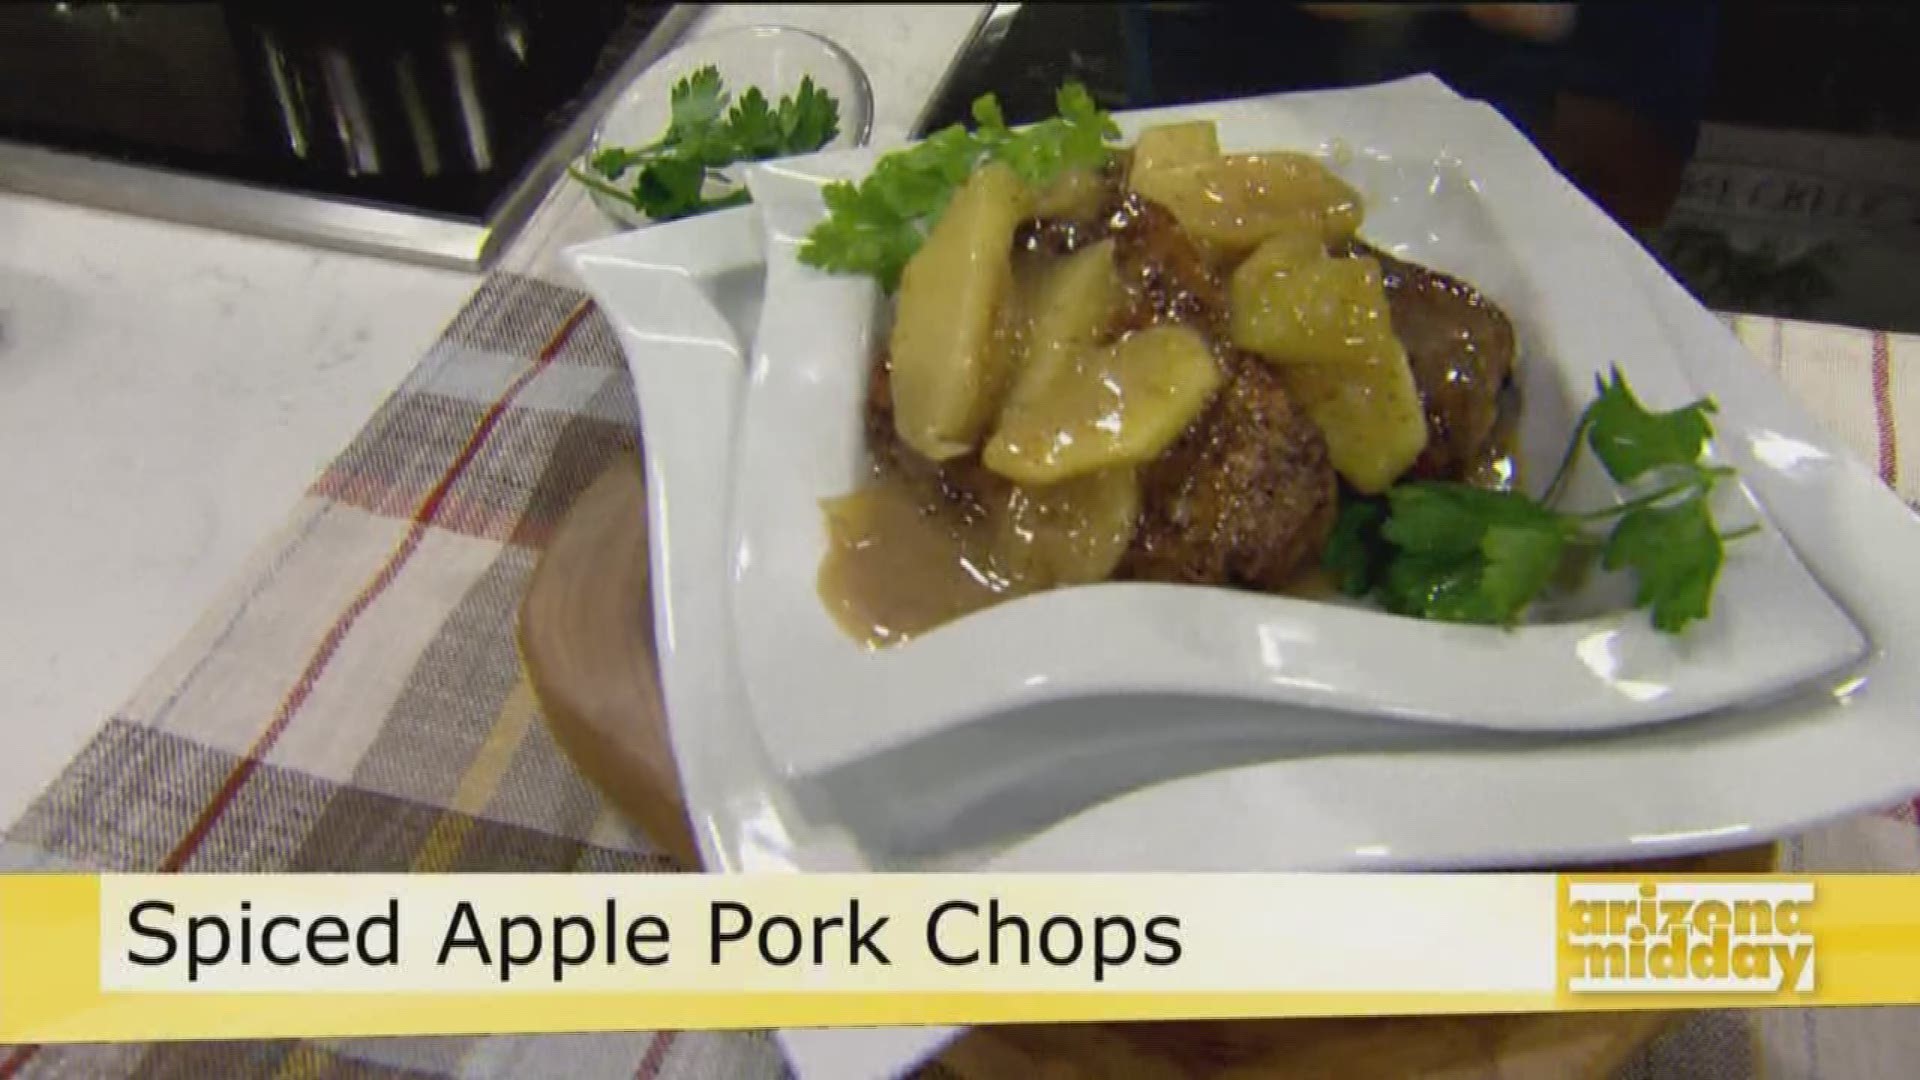 Jan shows us how to make the perfect pork chop for fall using an apple maple glaze.